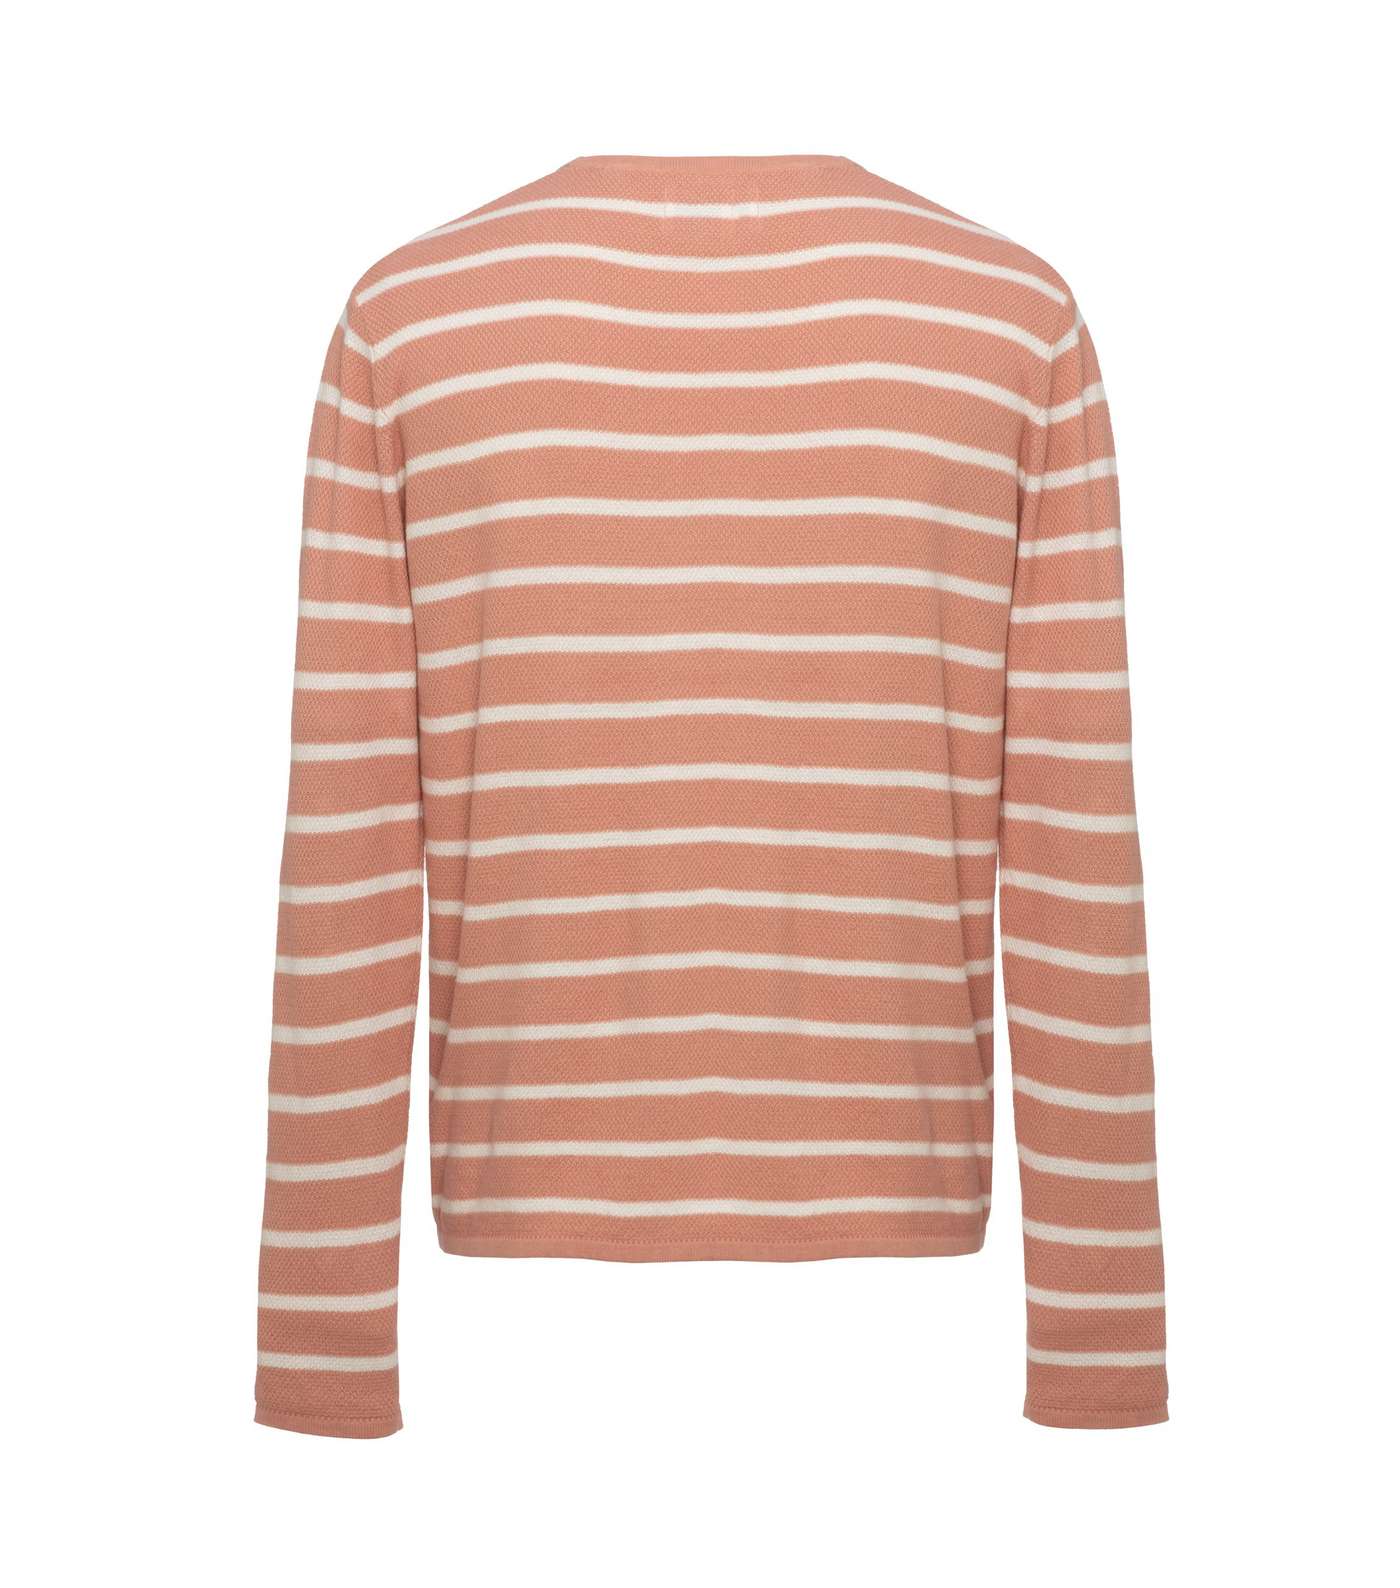 Only & Sons Pink Stripe Crew Neck Top  Image 2